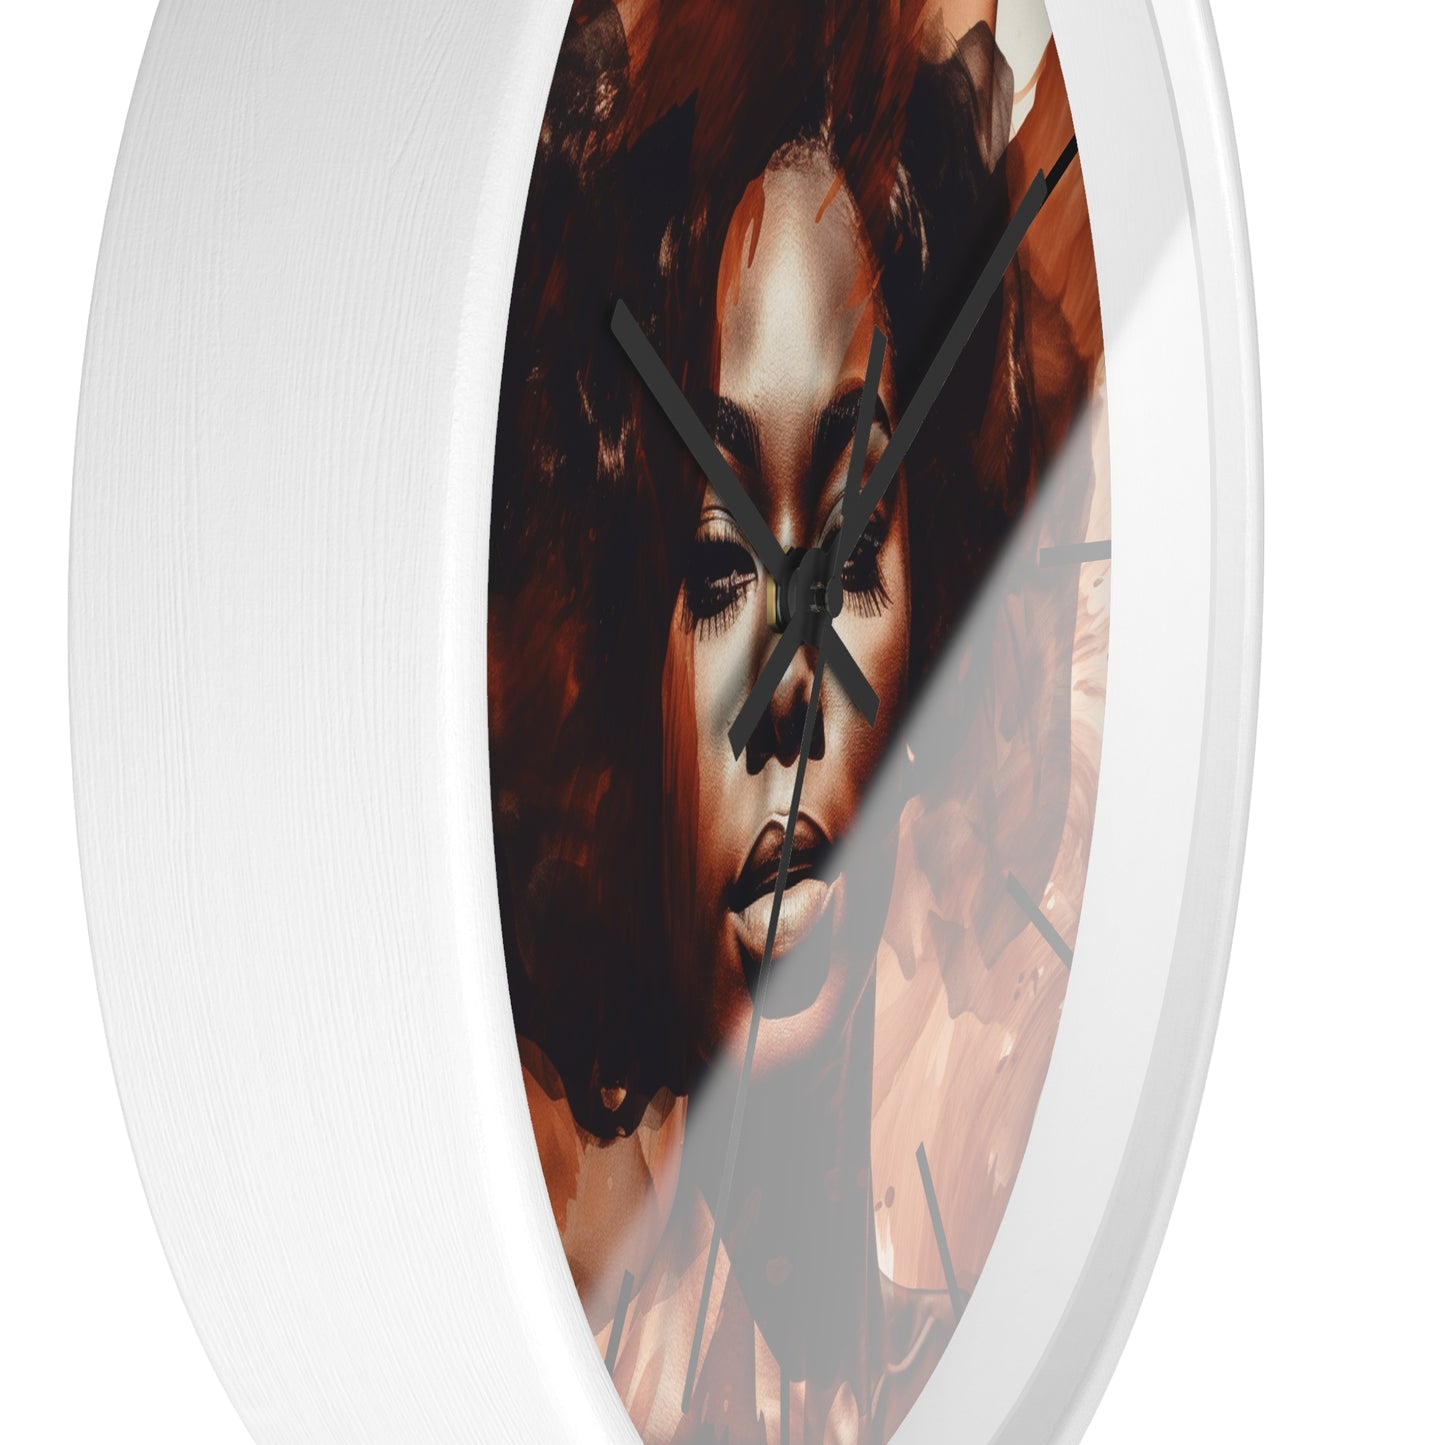 "With Grace"  Wall Clock